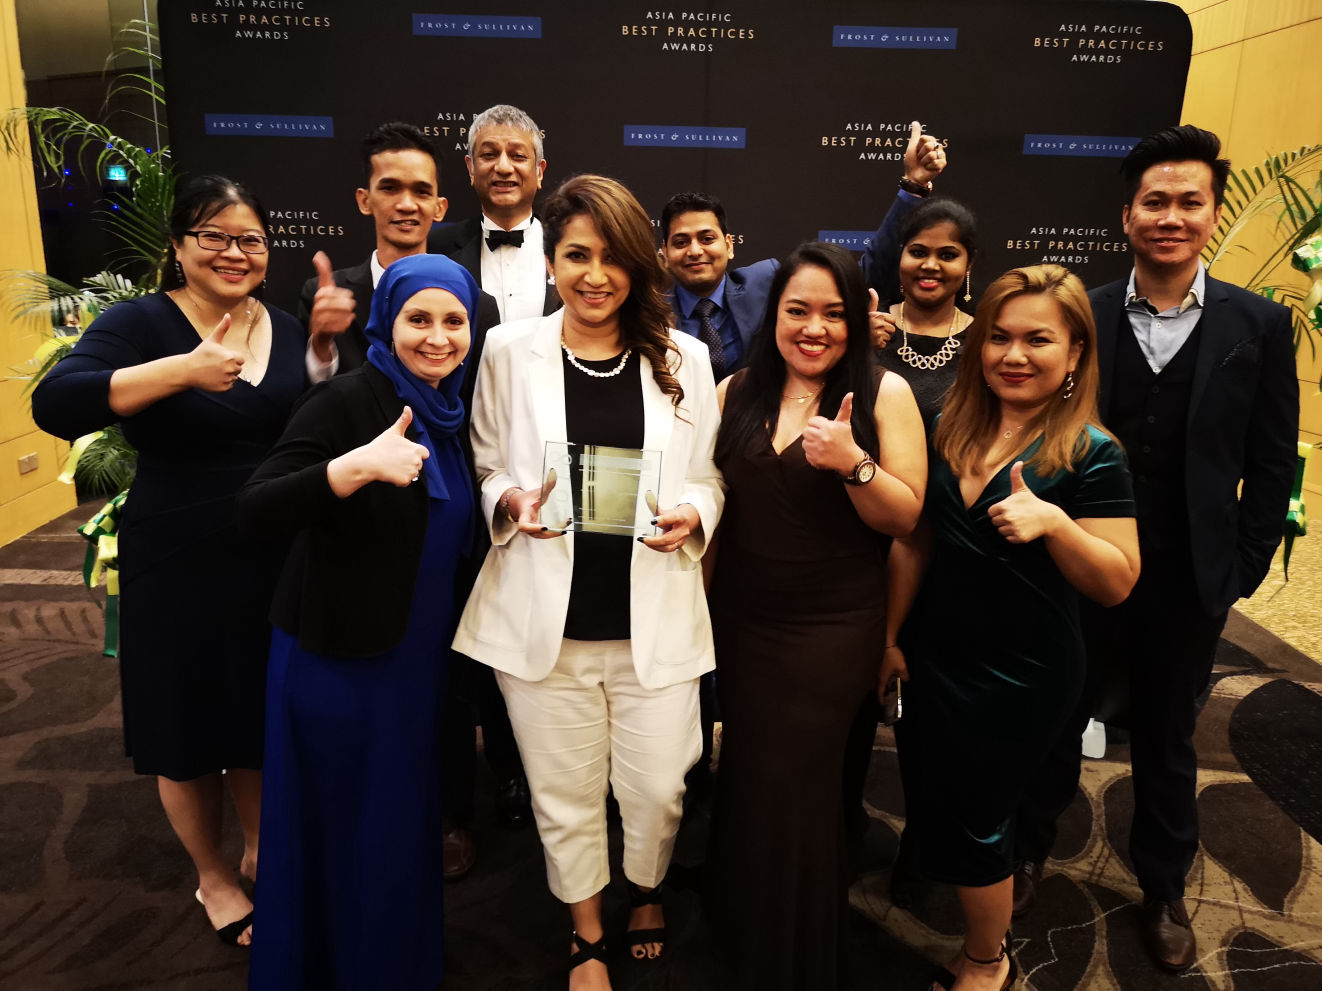 Star CRM Asia Pacific Best Practices Awards